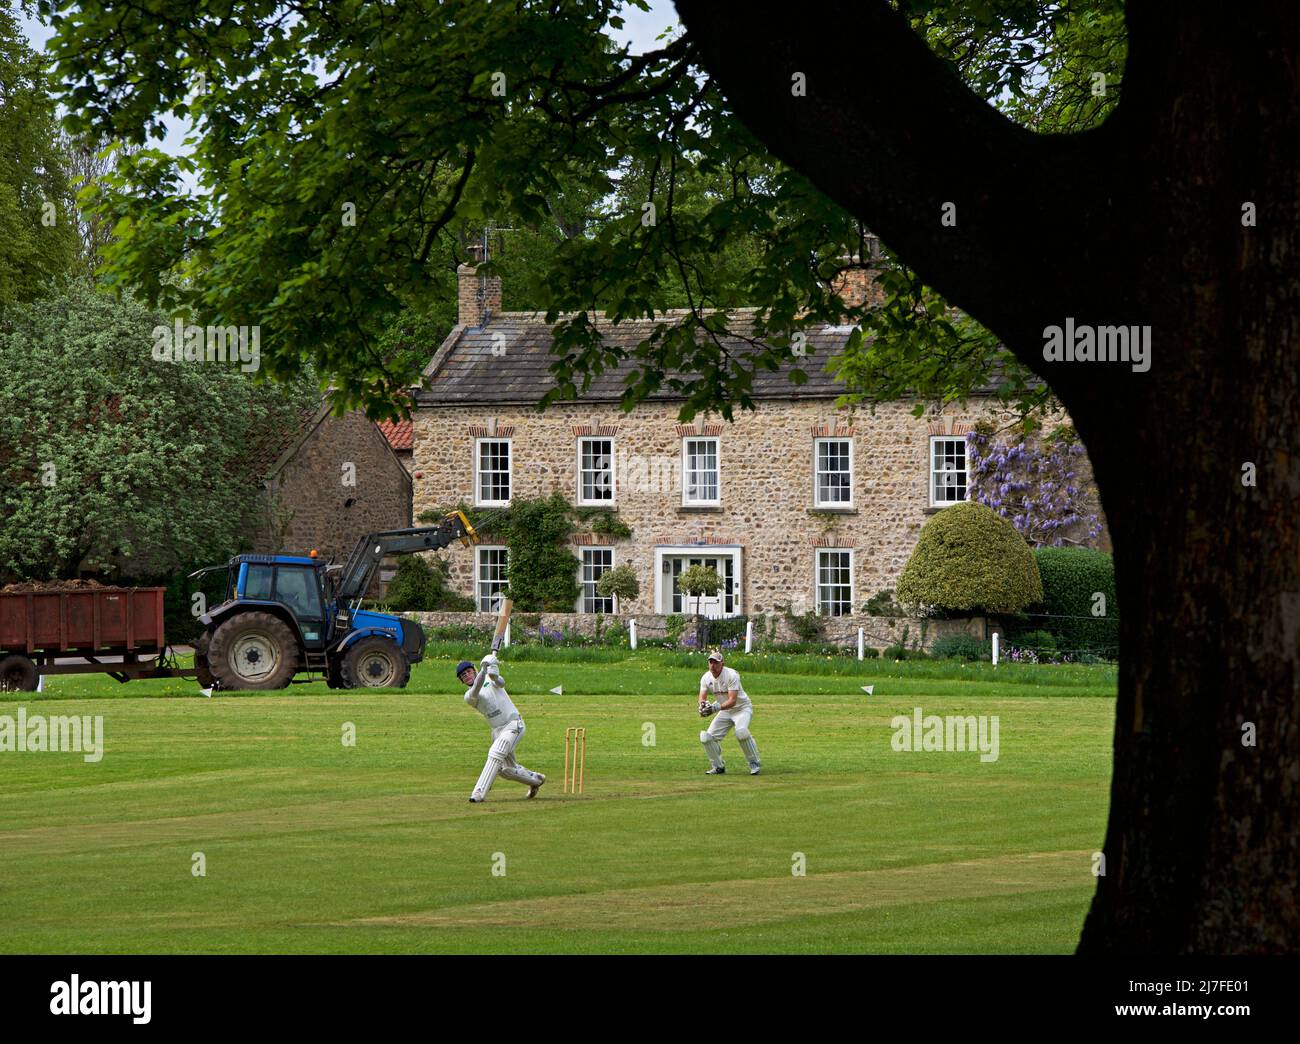 Cricket match in progress in the village of Crakehall, North Yorkshire, England UK Stock Photo